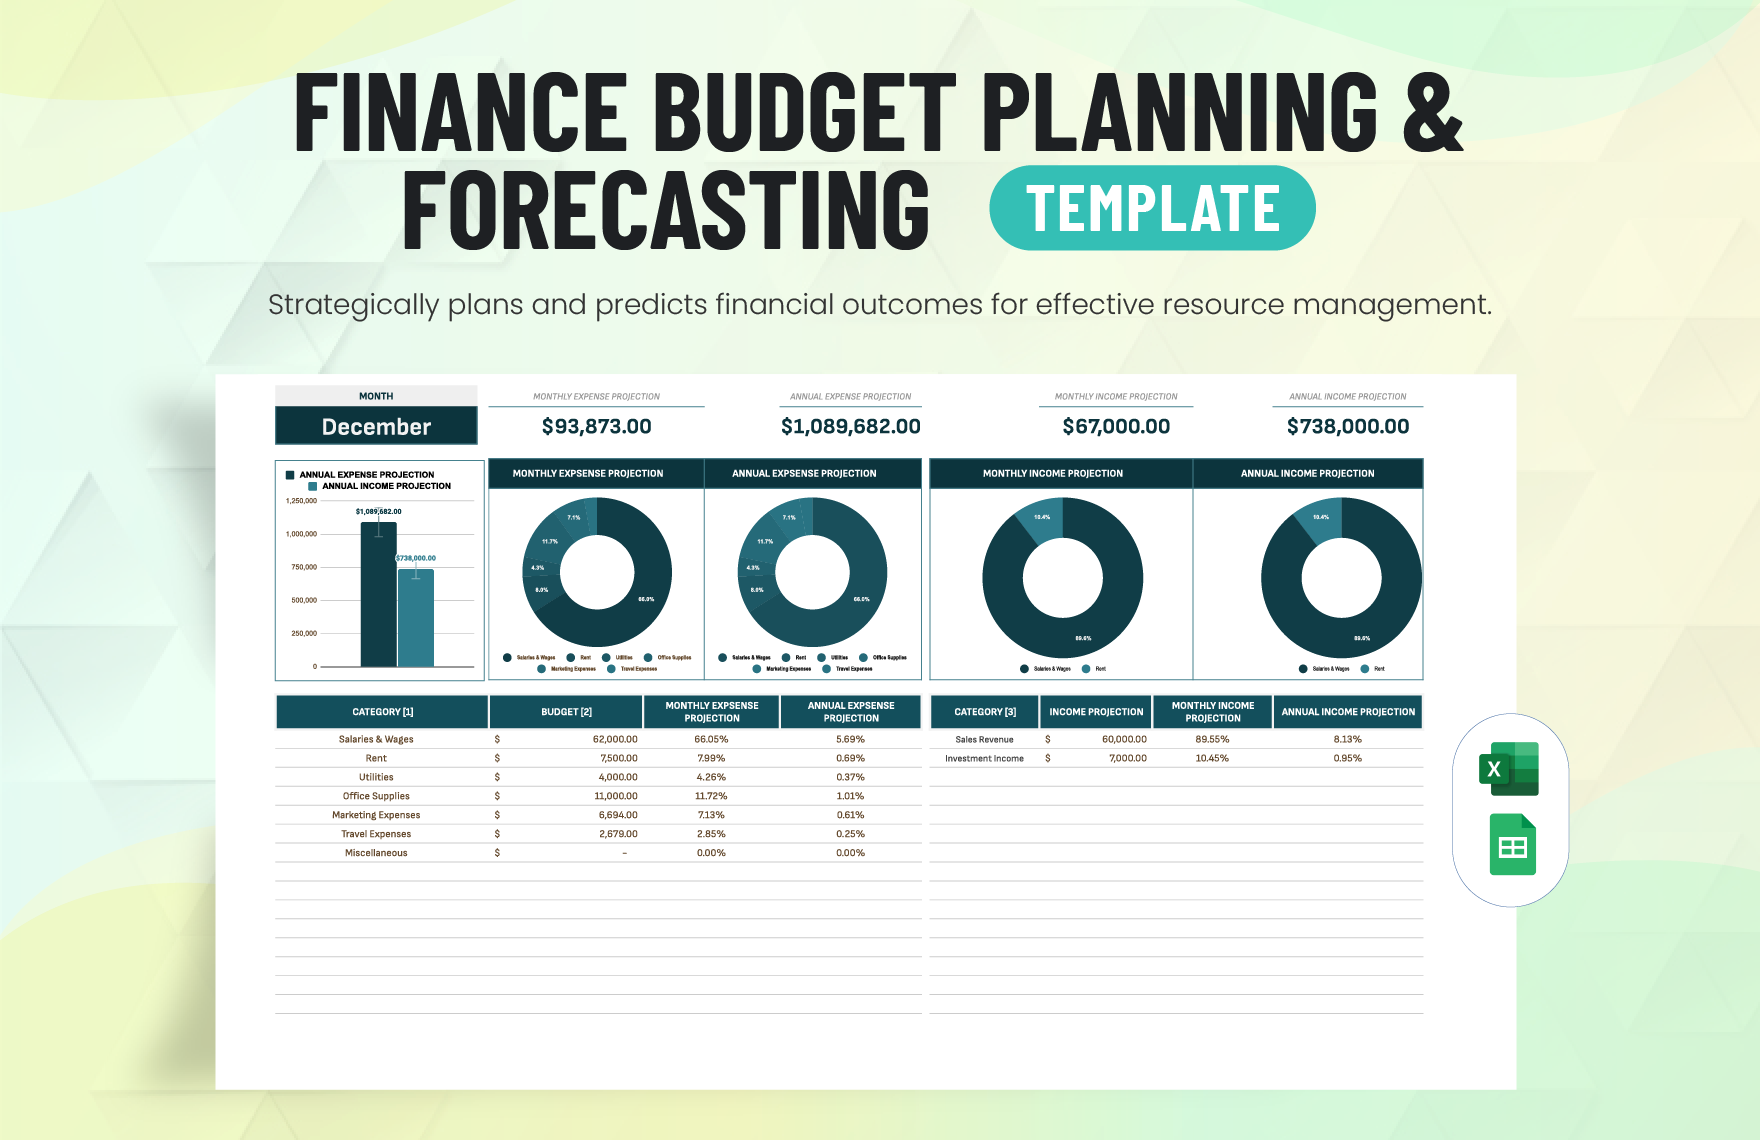 Finance Budget Planning & Forecasting Template